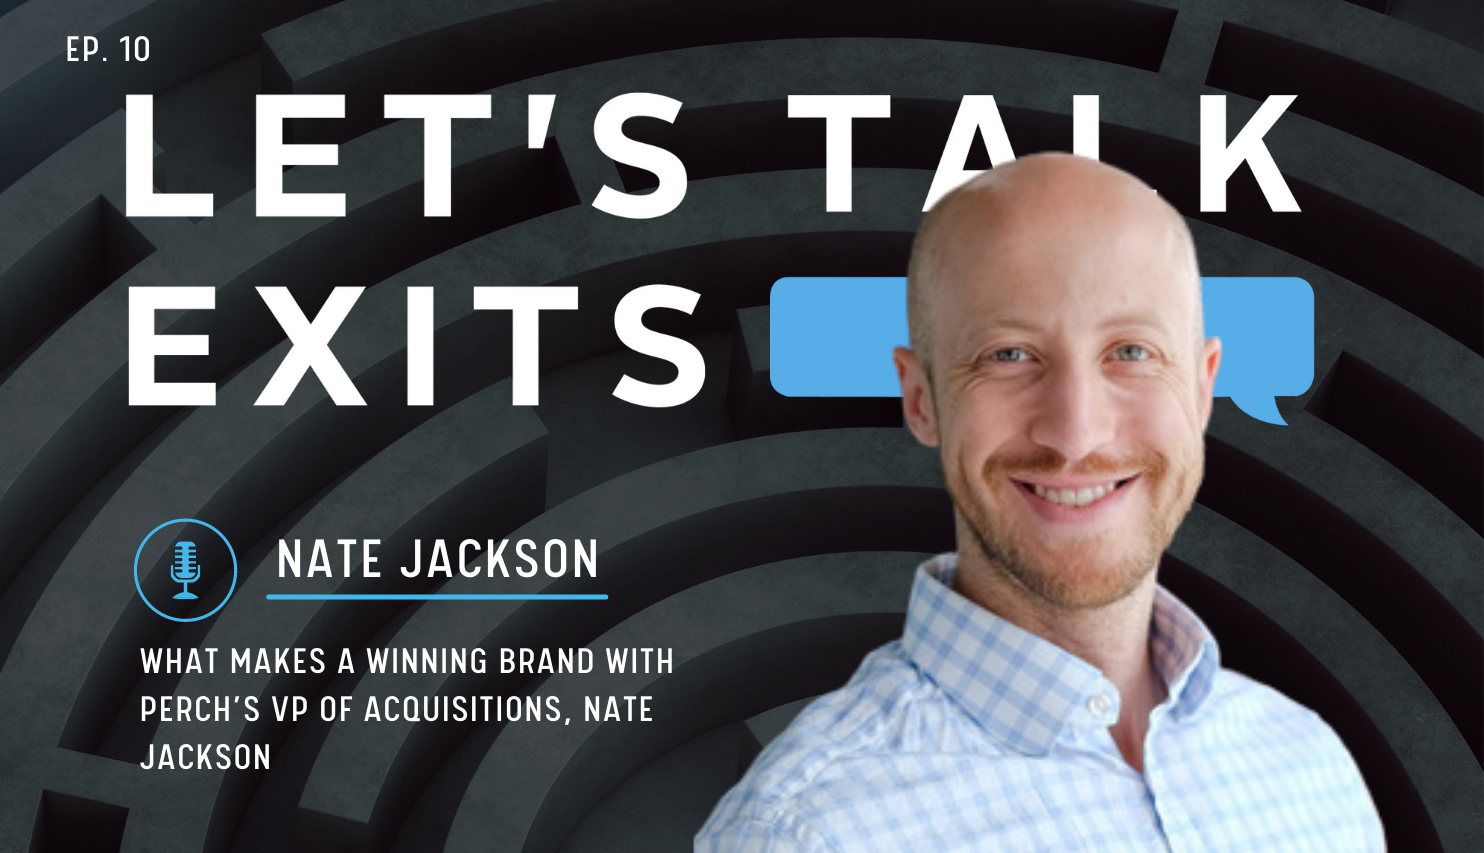 What Makes a Winning Brand with Perch’s VP of Acquisitions, Nate Jackson